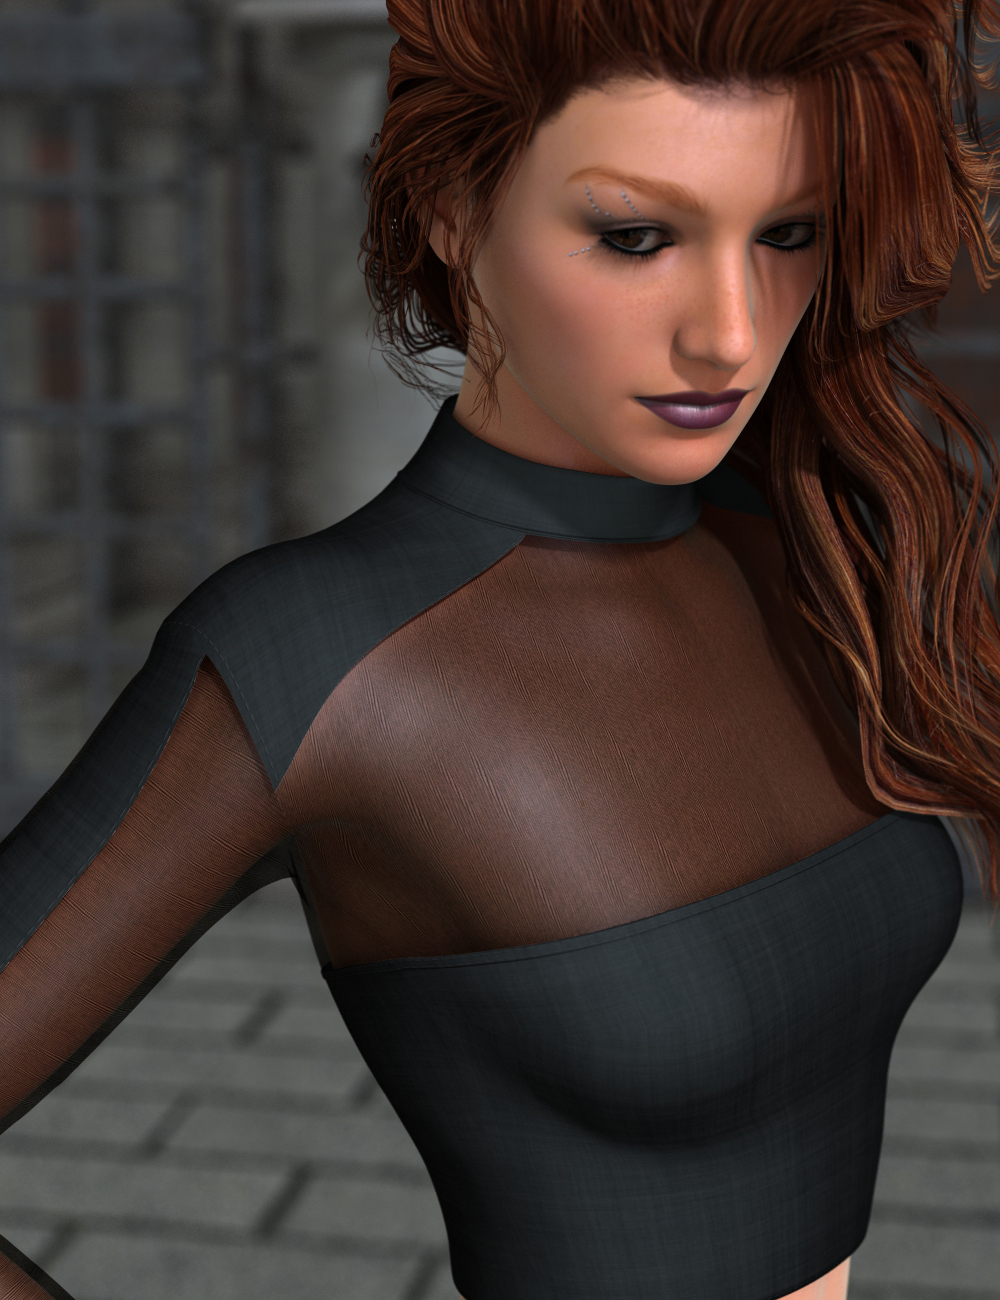 In The Know For Genesis 2 Females Daz 3d 8683